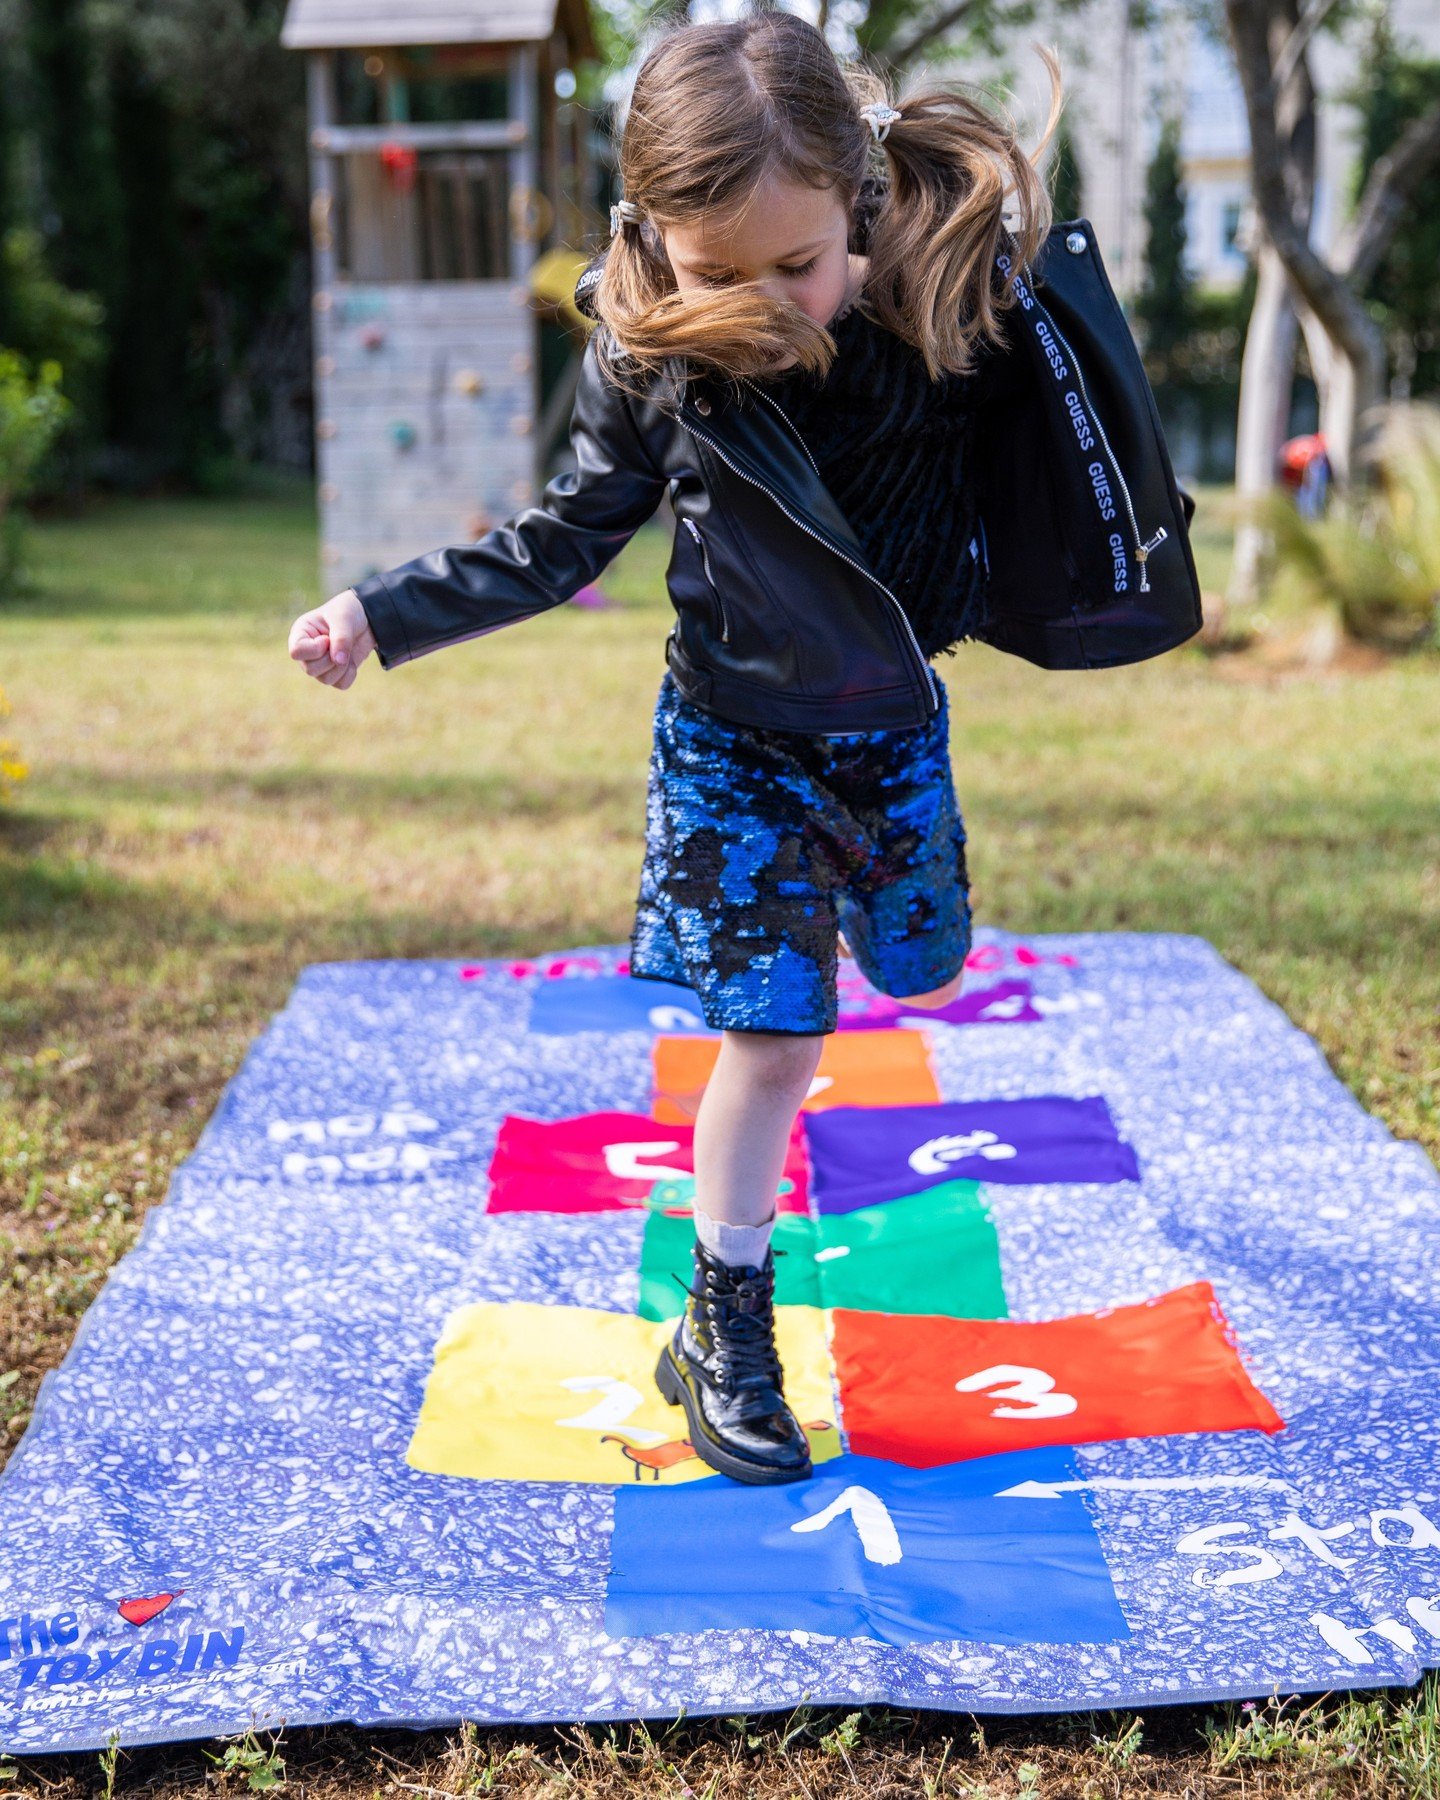 Hop, skip, and jump your way to victory in this thrilling hopscotch board game, where strategy and agility collide for endless family fun! 
#iamthetoybin #carryingJoy
📷 @stanislava.t.hricova